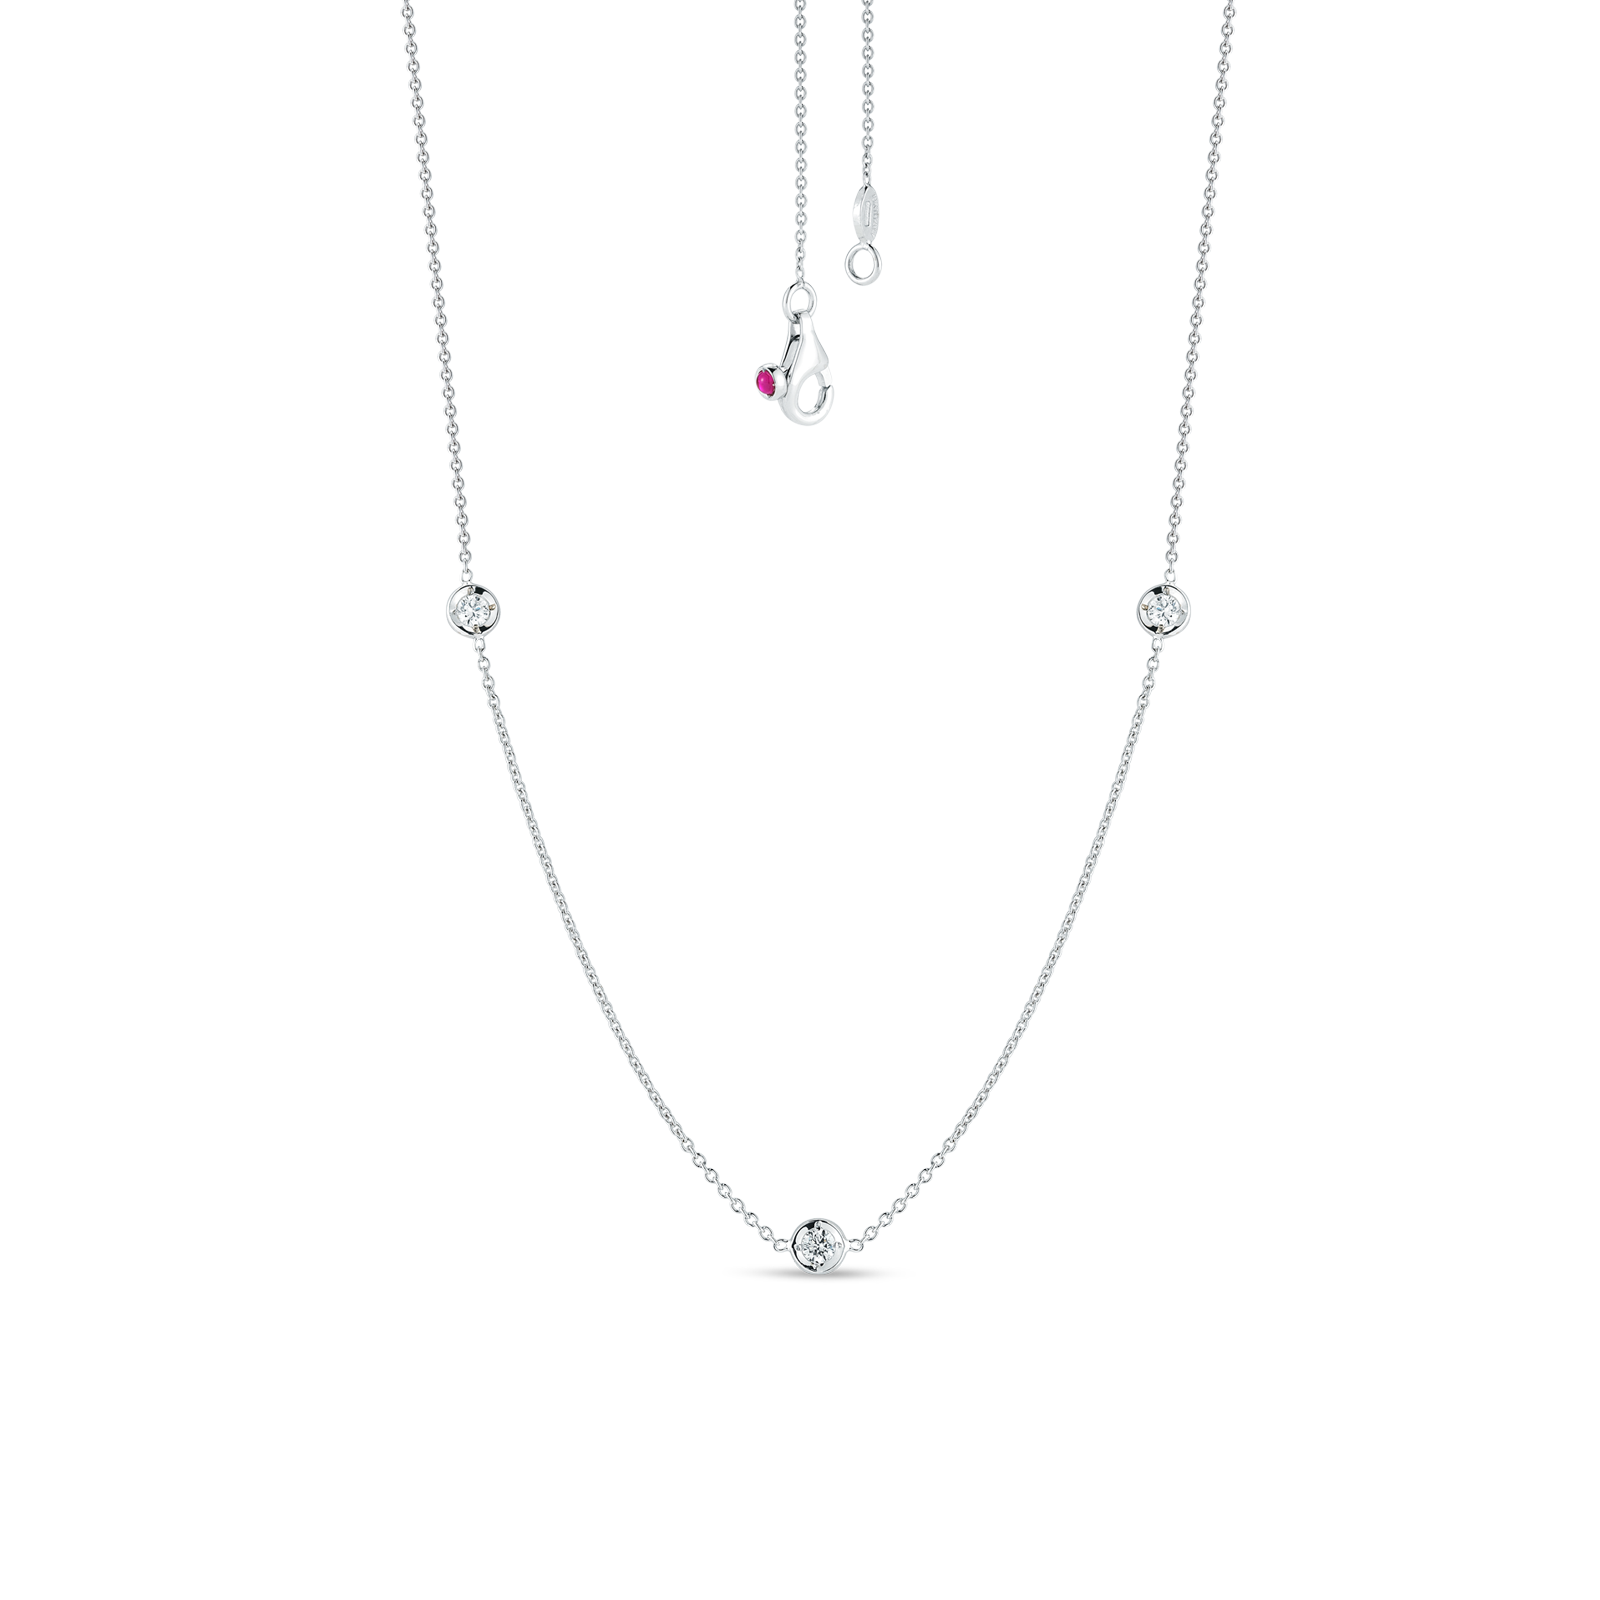 Roberto Coin 18KW Diamonds By The Inch Necklace